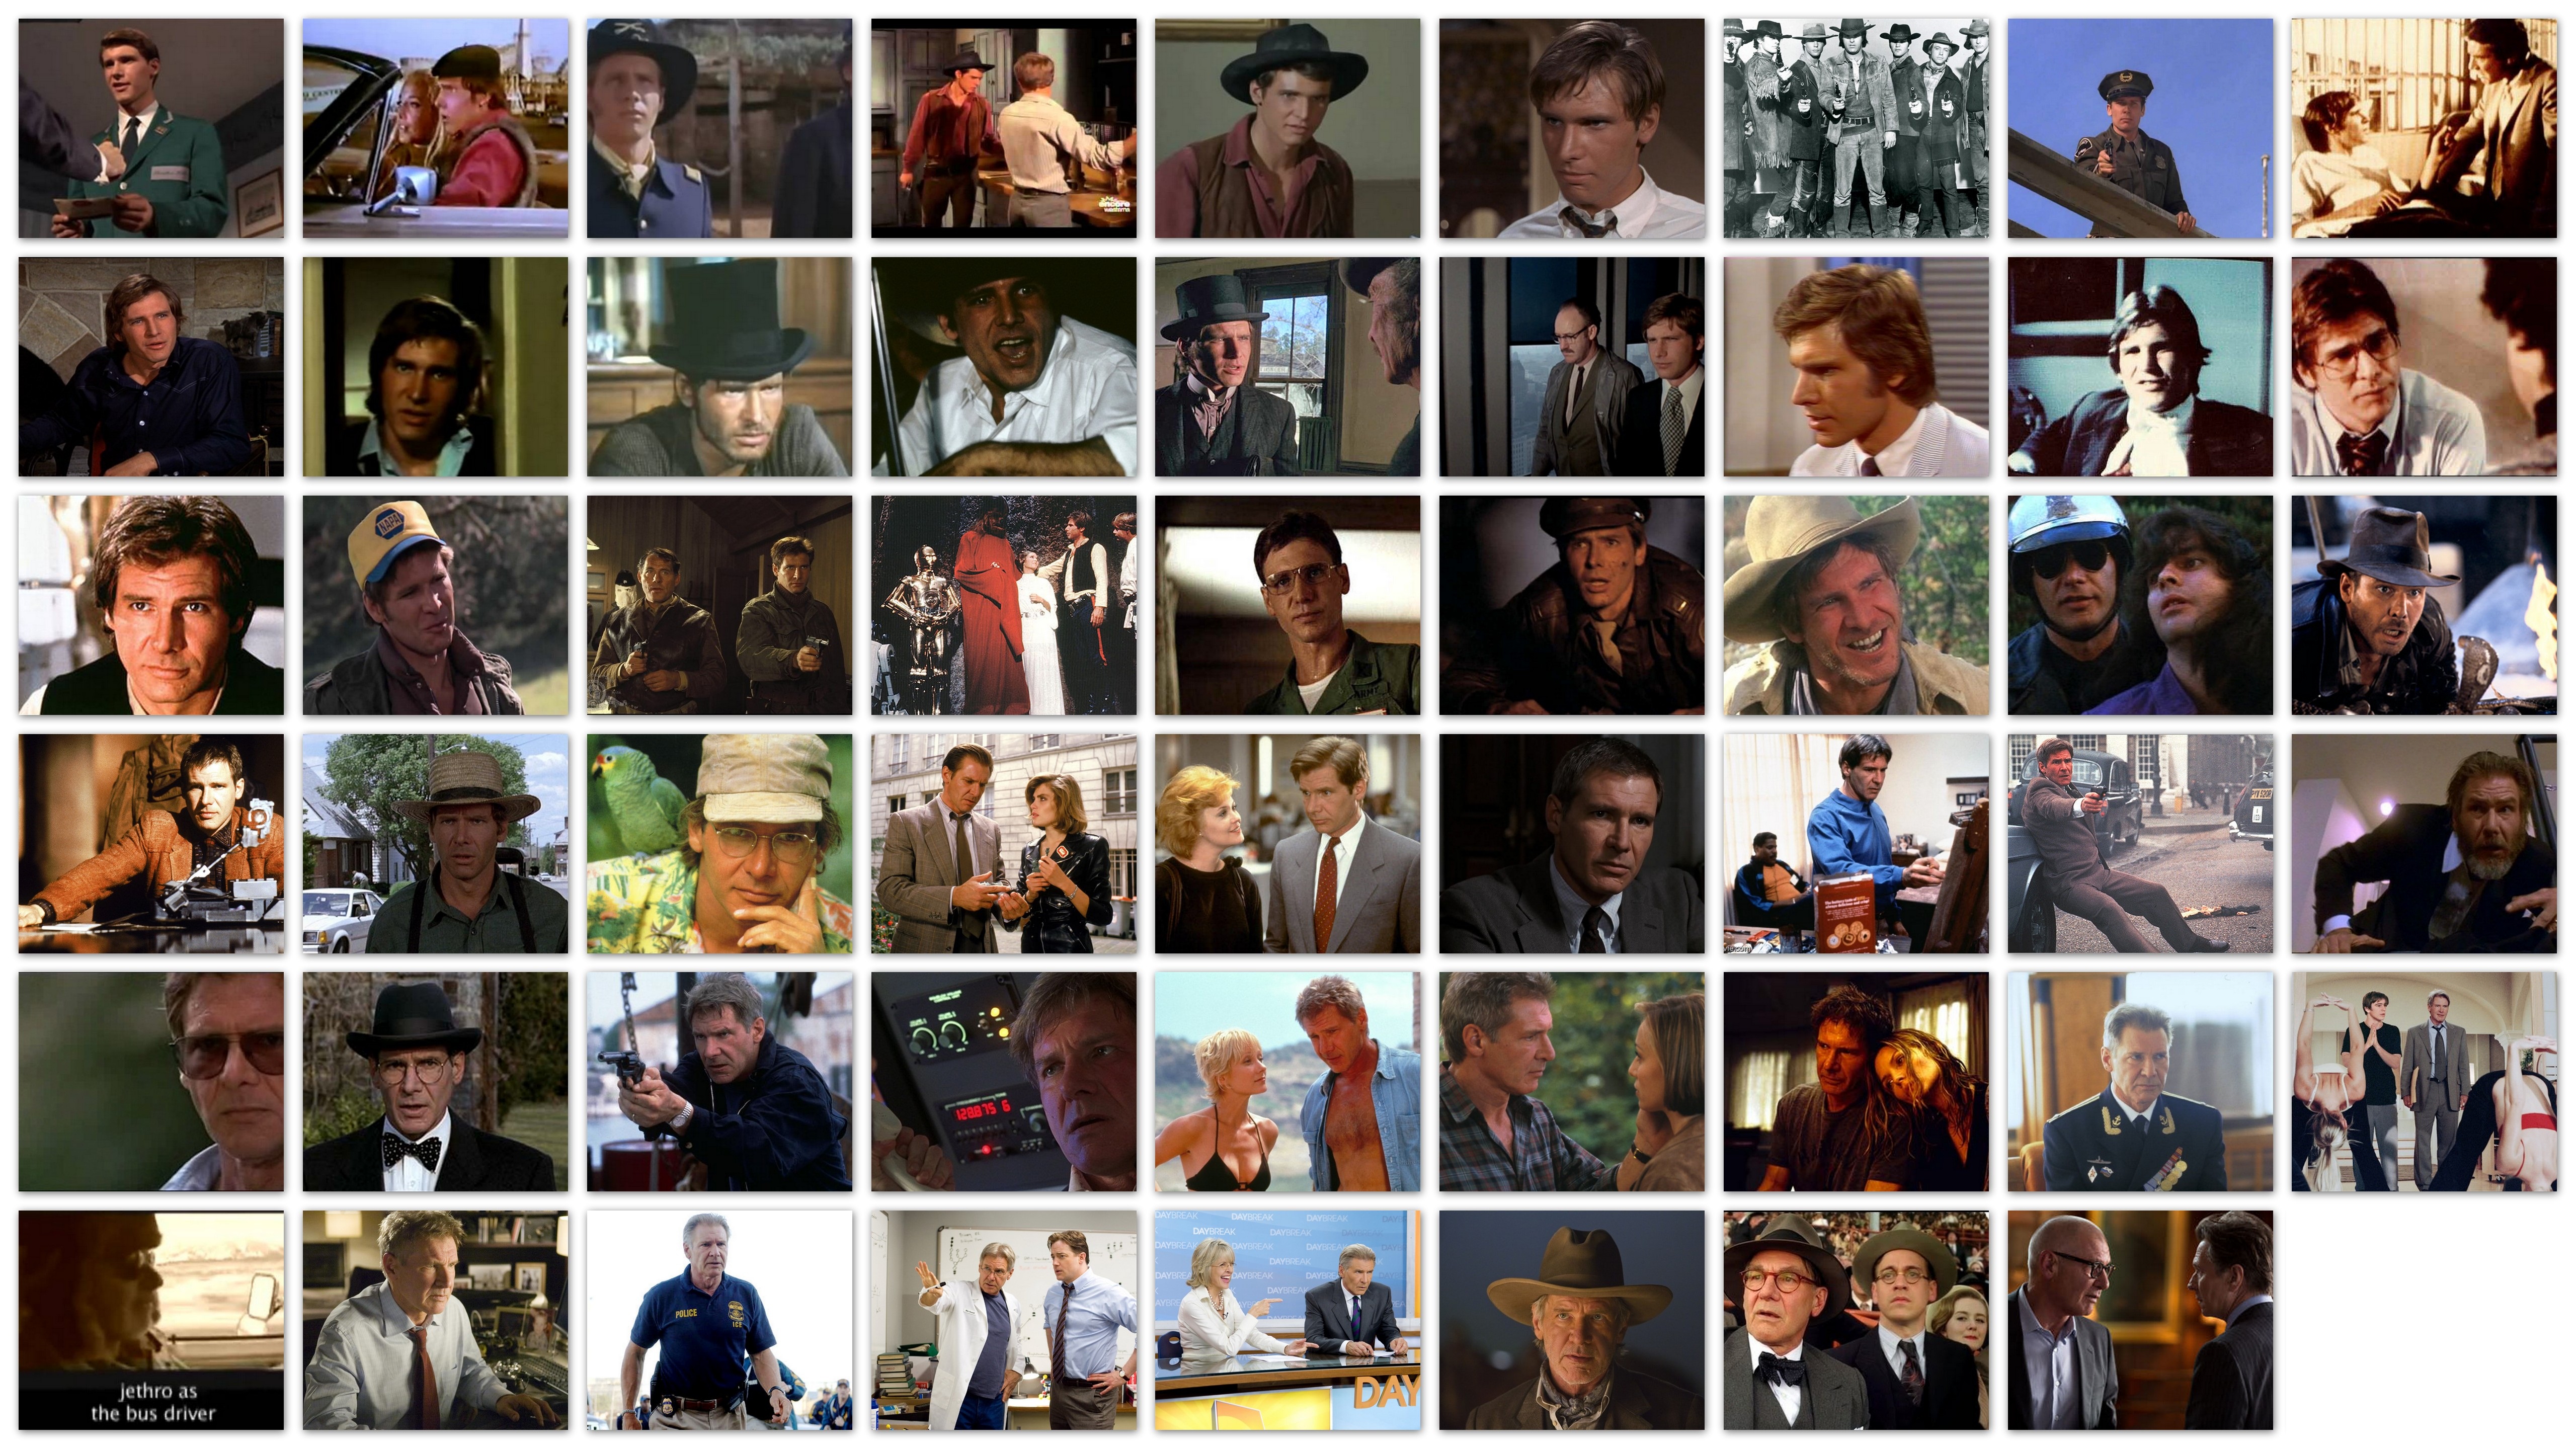 Overview of the roles of actor Harrison Ford in movies